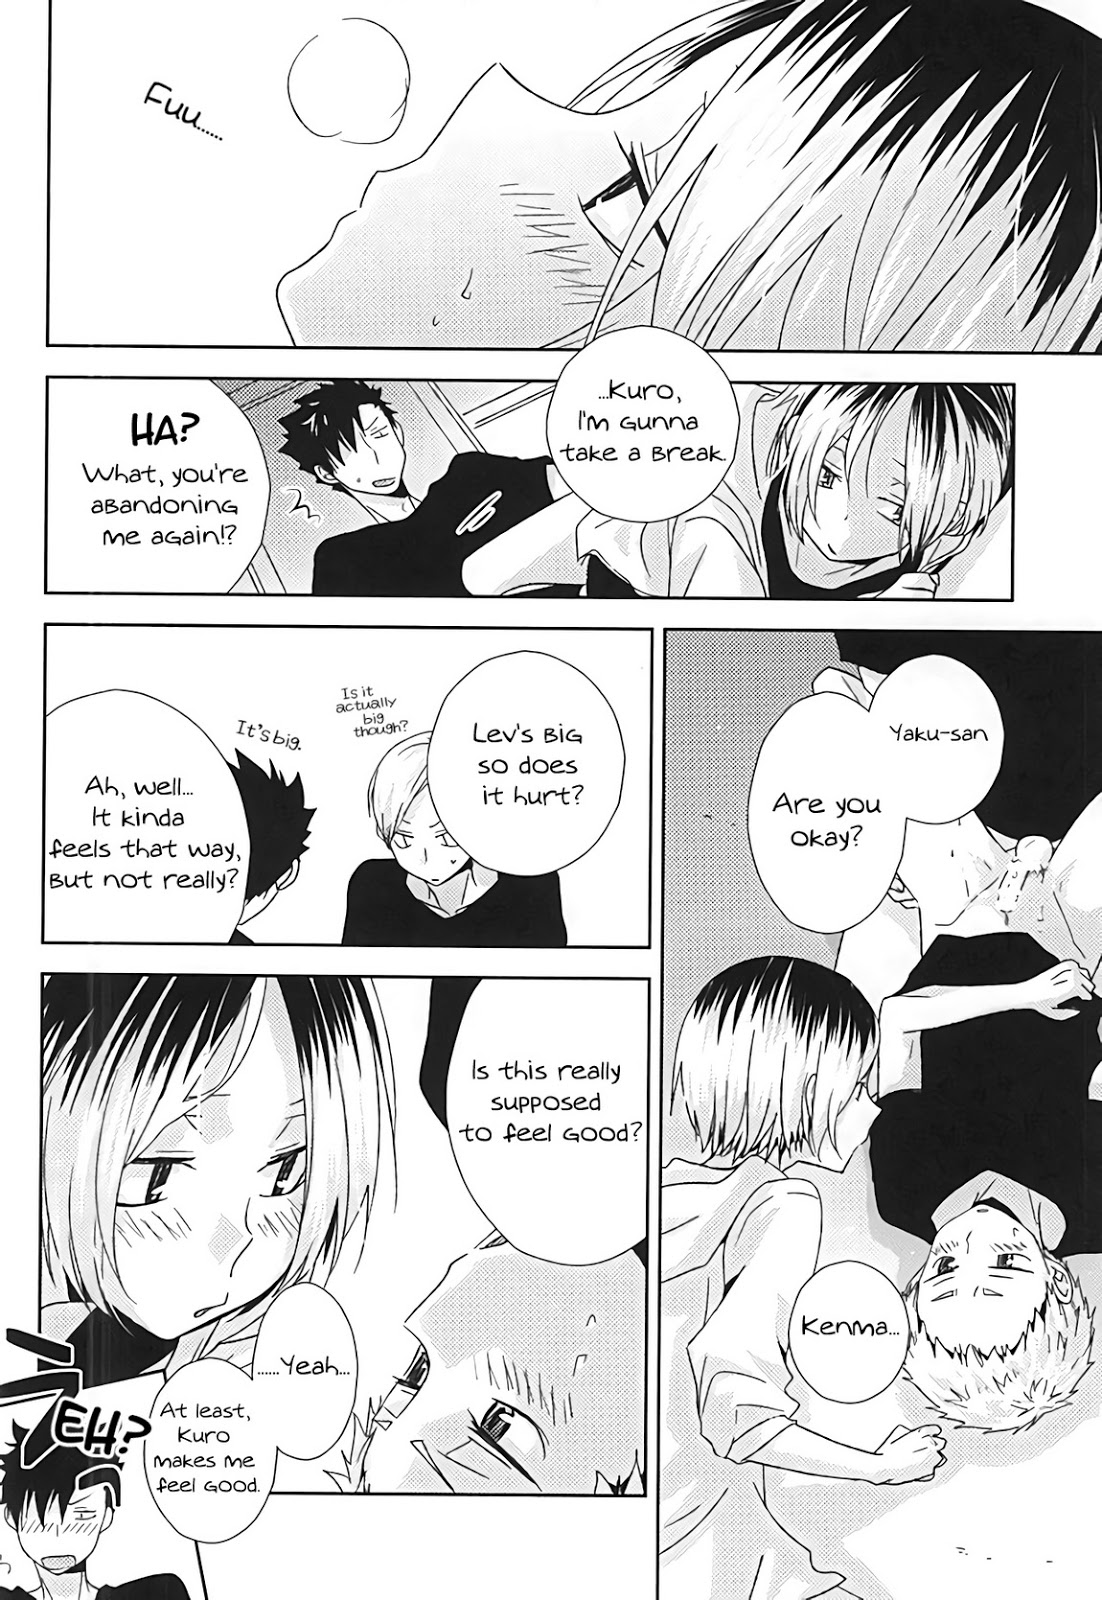 (SPARK10) [MOBRIS (Tomoharu)] HOWtoPLAY tutrial (Haikyuu!!) [English] [Homies over Hoes] page 23 full